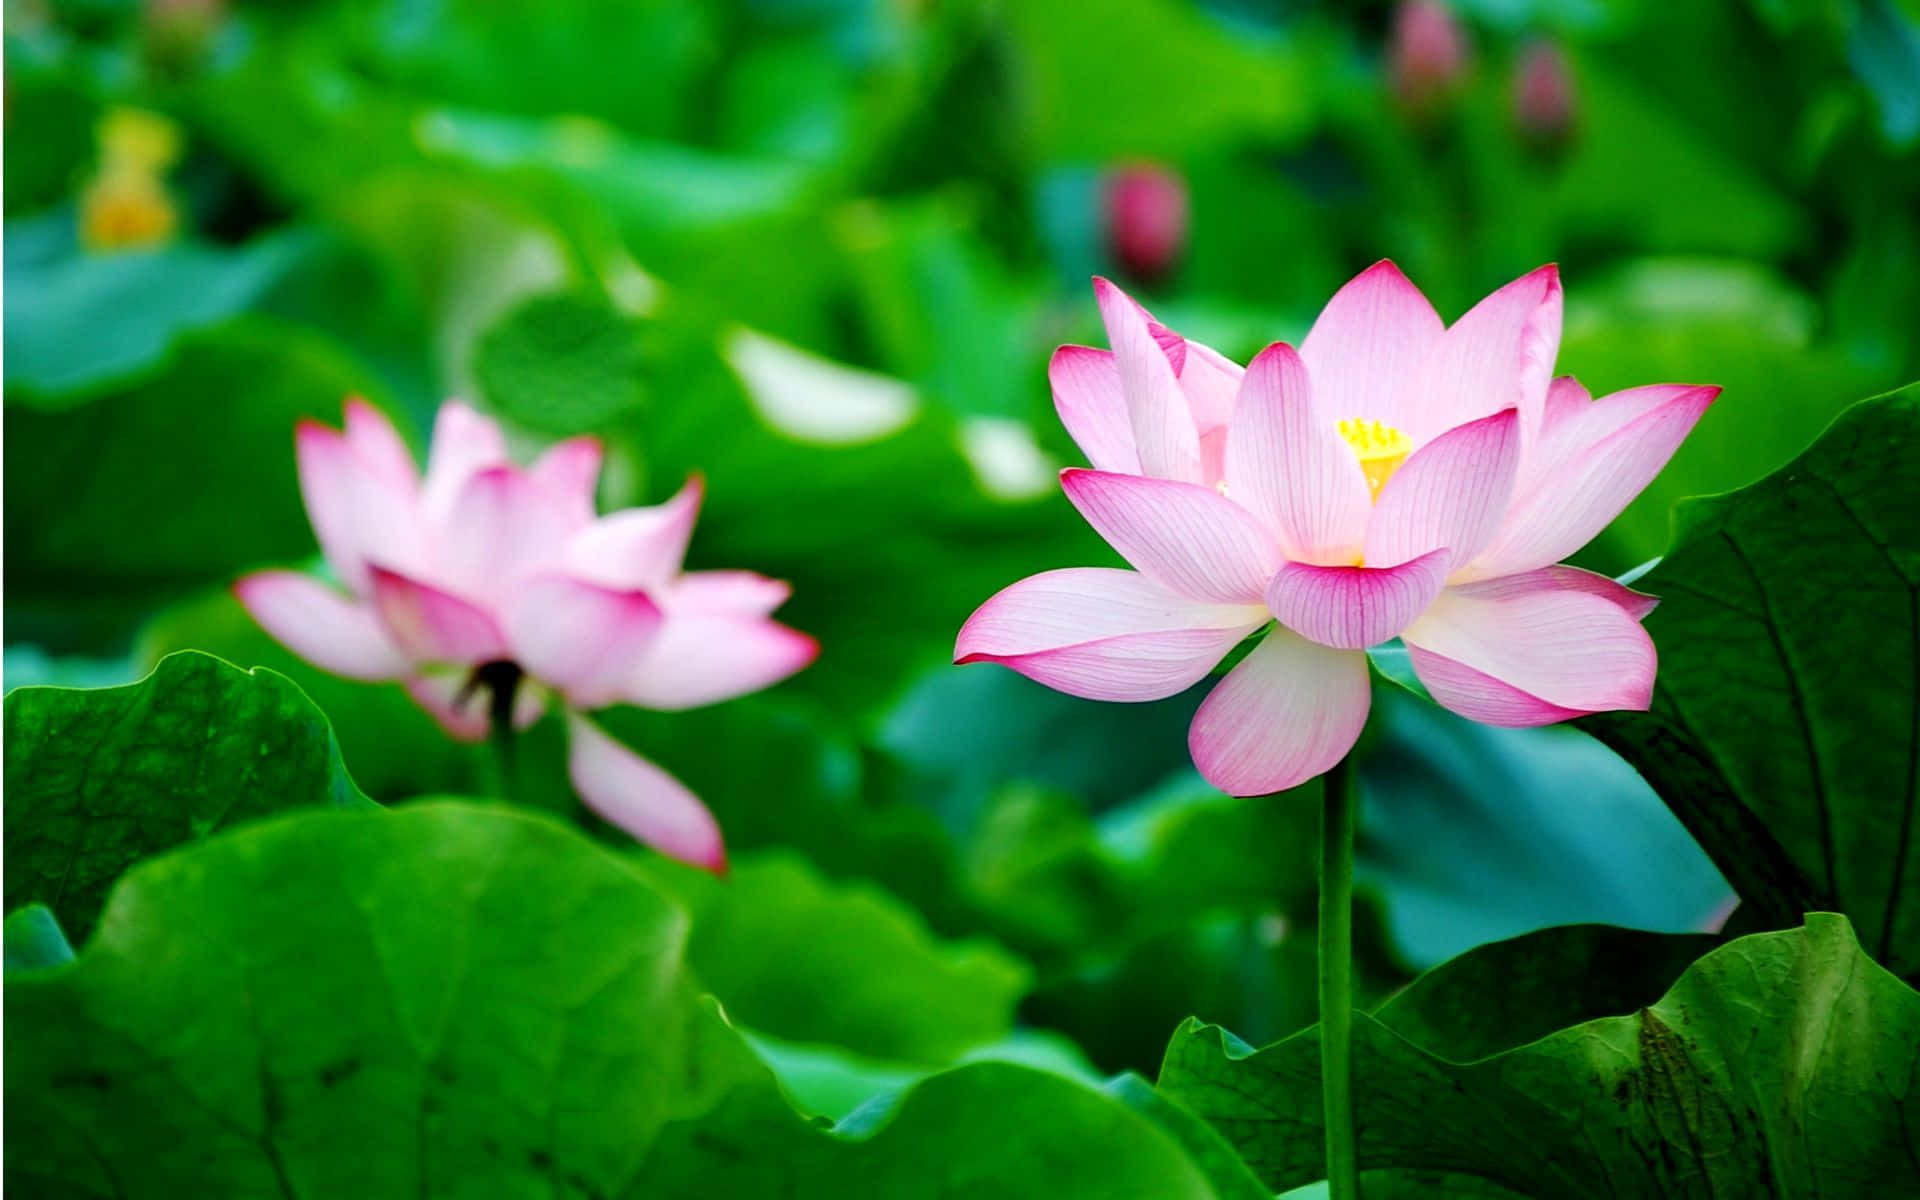 Caption: Serene Lotus Flower Blooming in Tranquil Waters